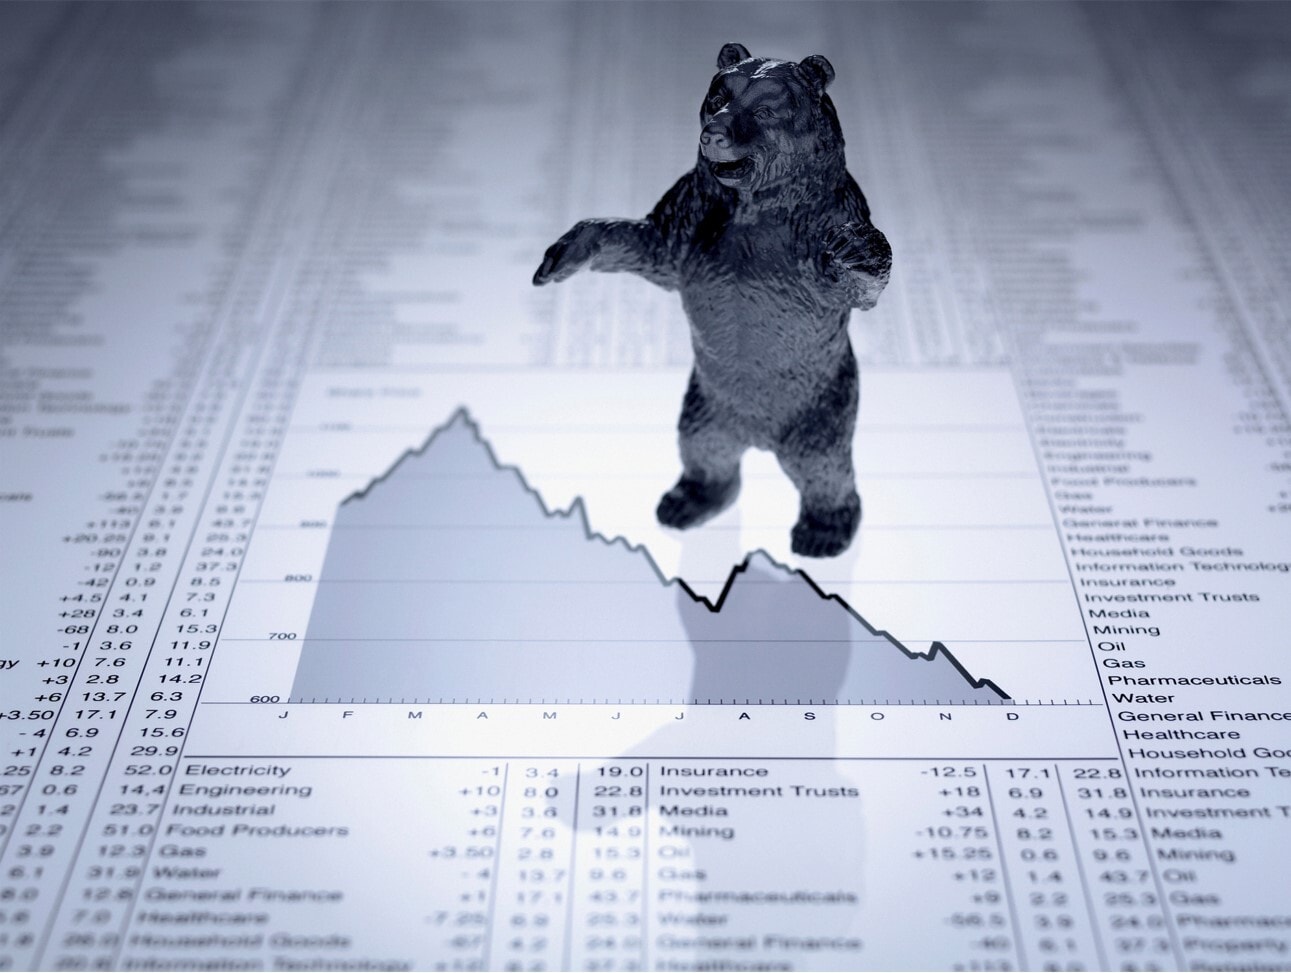 Analysts at Trading on the Mark take a bearish view of current US market conditions, expecting stocks to fall in the near term.